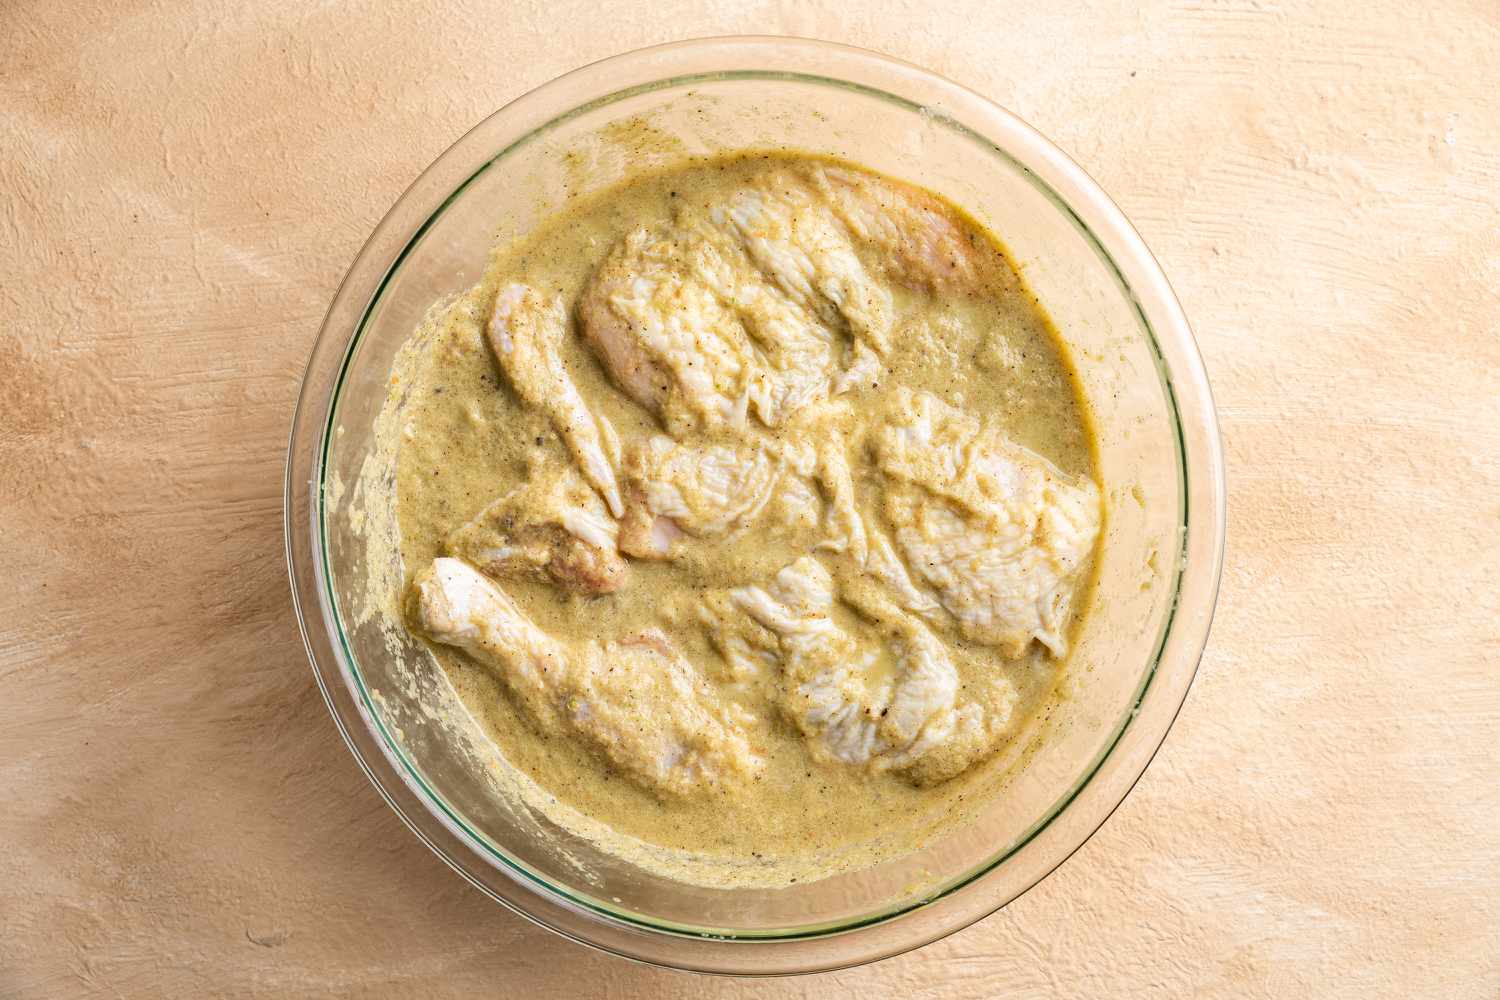 Put the chicken in a large bowl and pour over the marinade